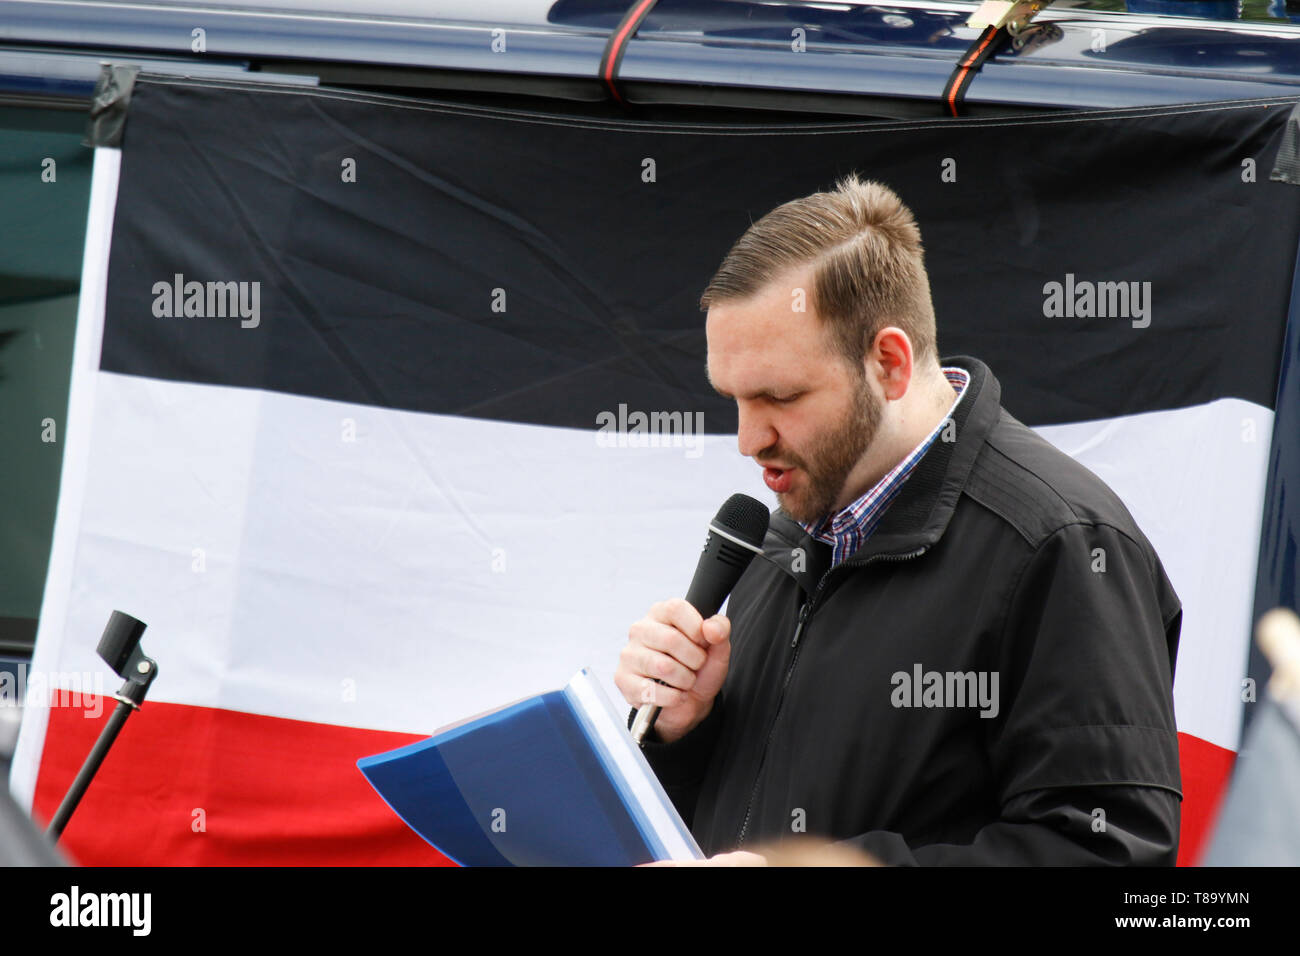 Pforzheim, Germany. 11th May 2019. Sascha Krolzig, one of the two chairmen of the party Die Rechte, addresses the rally. Around 80 people participated in a march through Pforzheim, organised by the right-wing party ‘Die Rechte’ (The Right). The main issues of the march was the promotion of voting for Die Rechte’ in the upcoming European Election and their anti-immigration policies. They were confronted by several hundred counter-protesters from different political organisations. Stock Photo